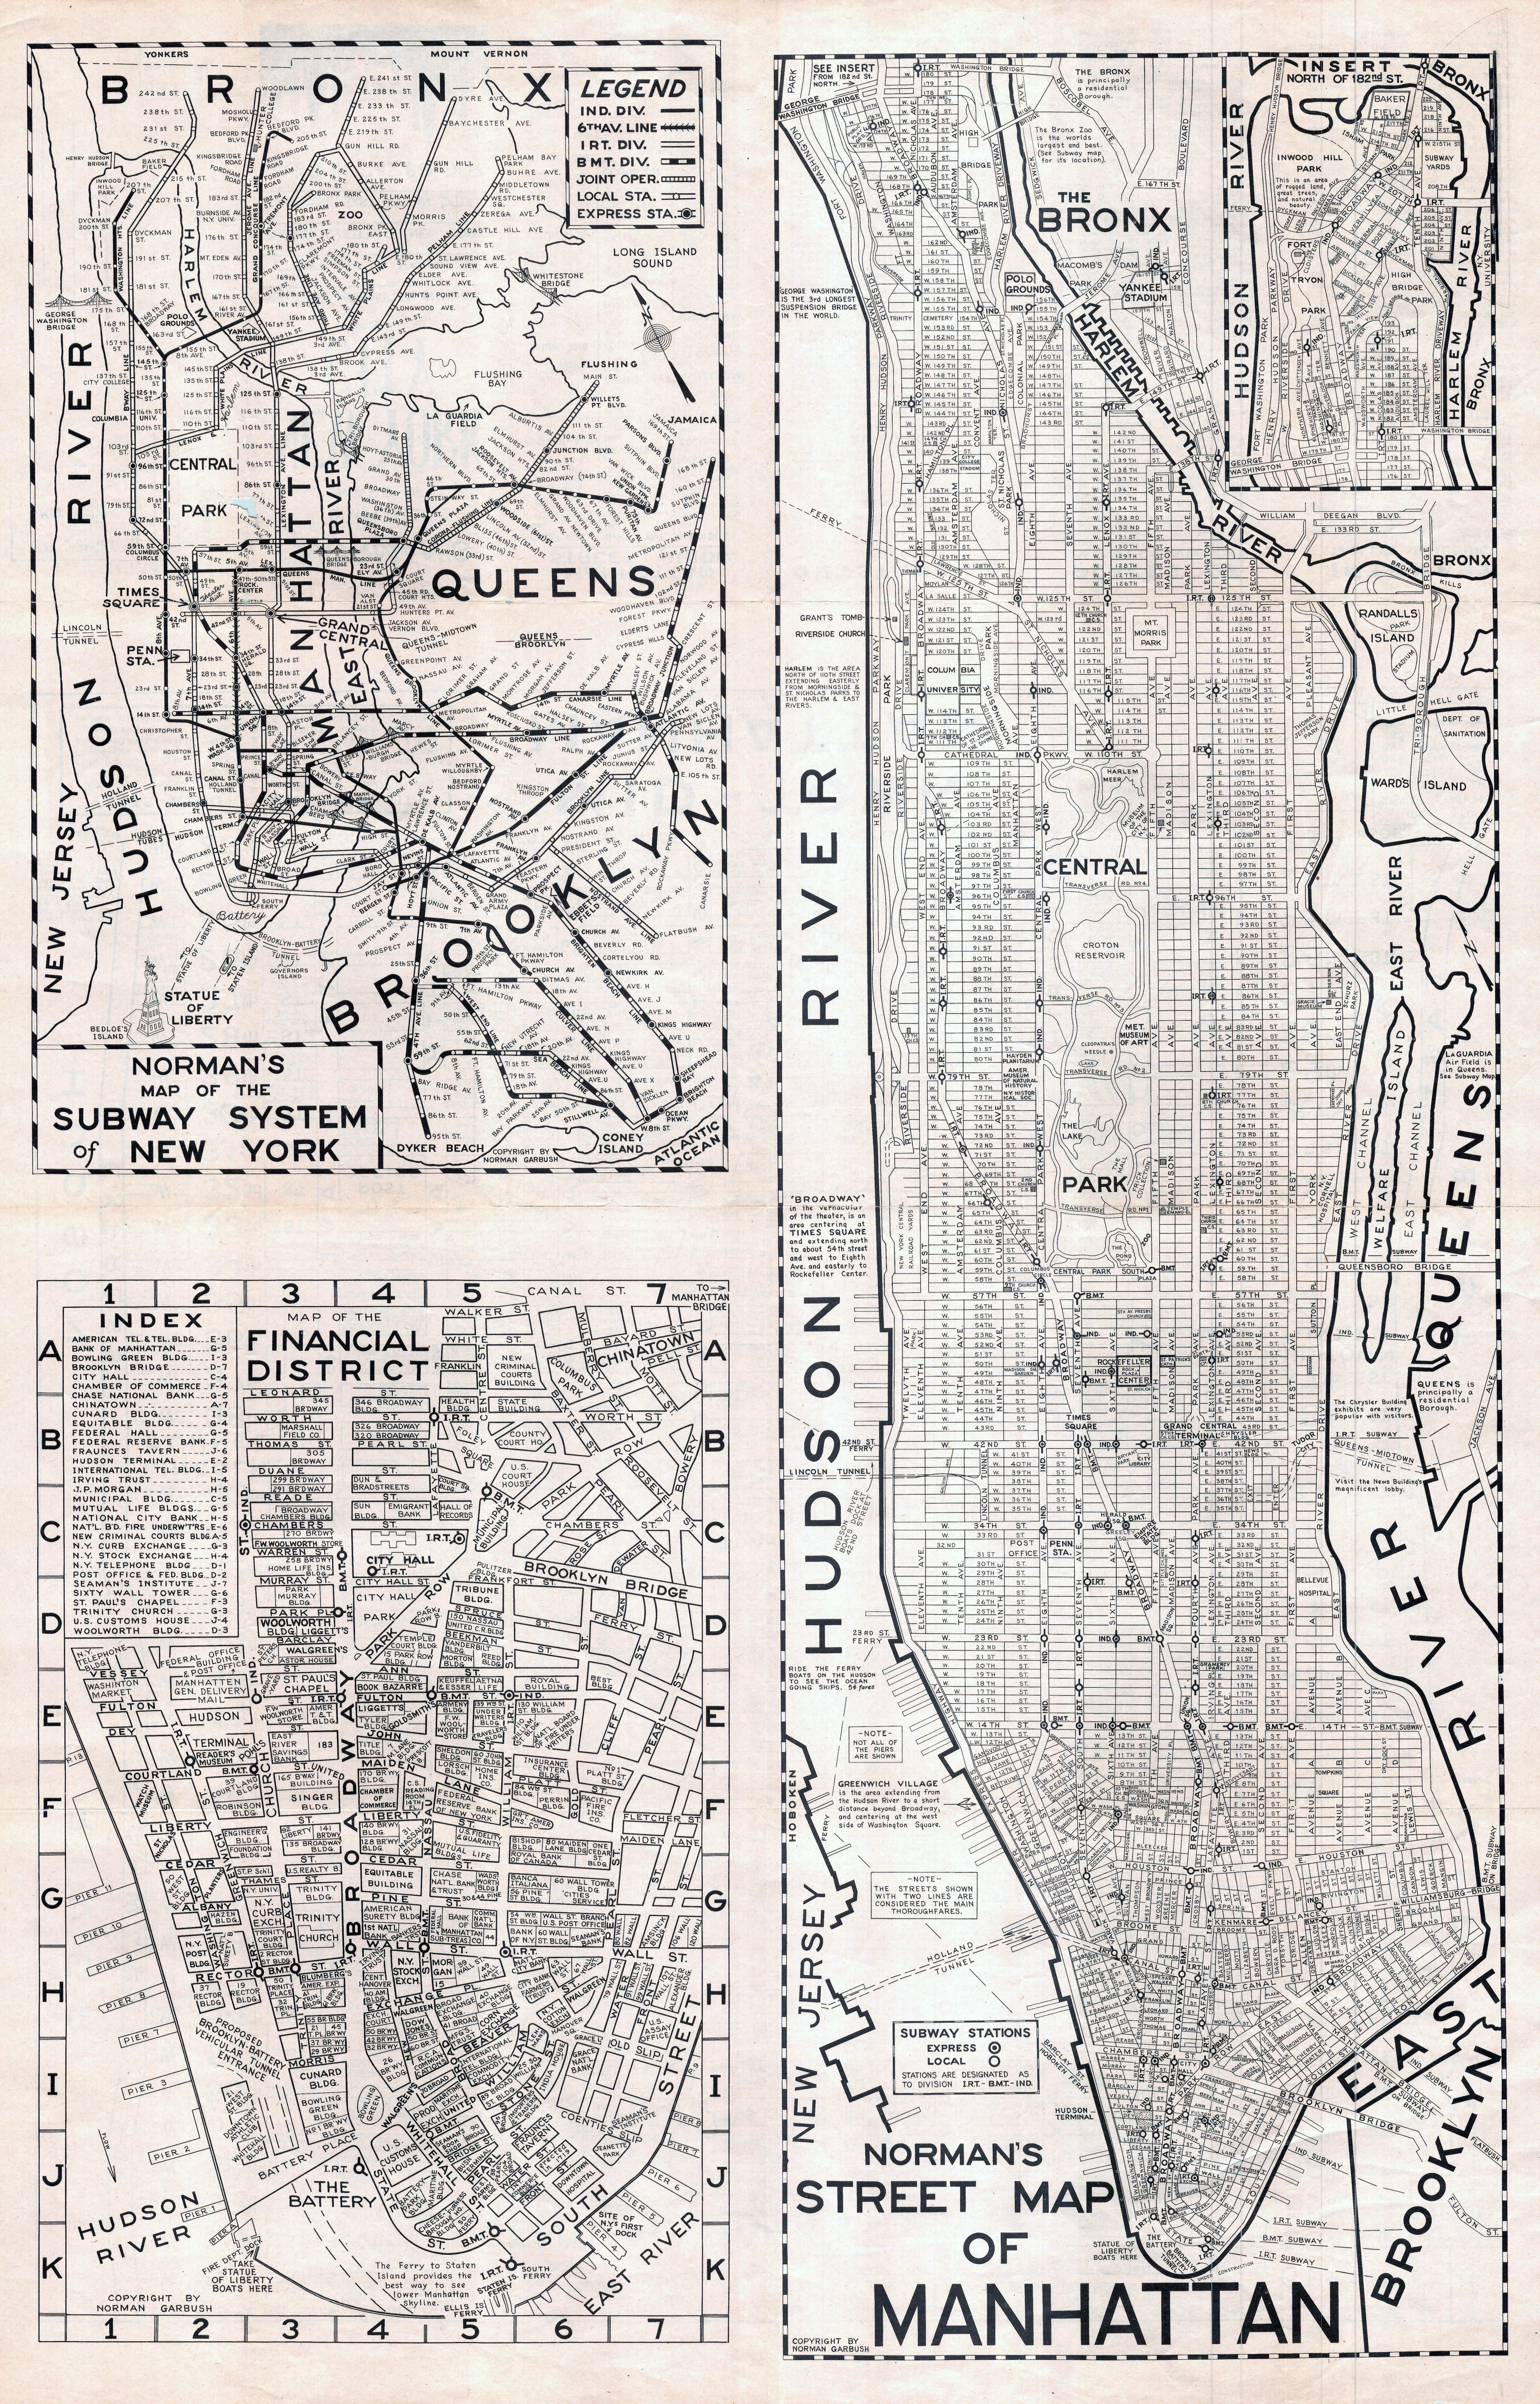 Large Scaled Printable Old Street Map Of Manhattan, New York City - Printable New York Street Map